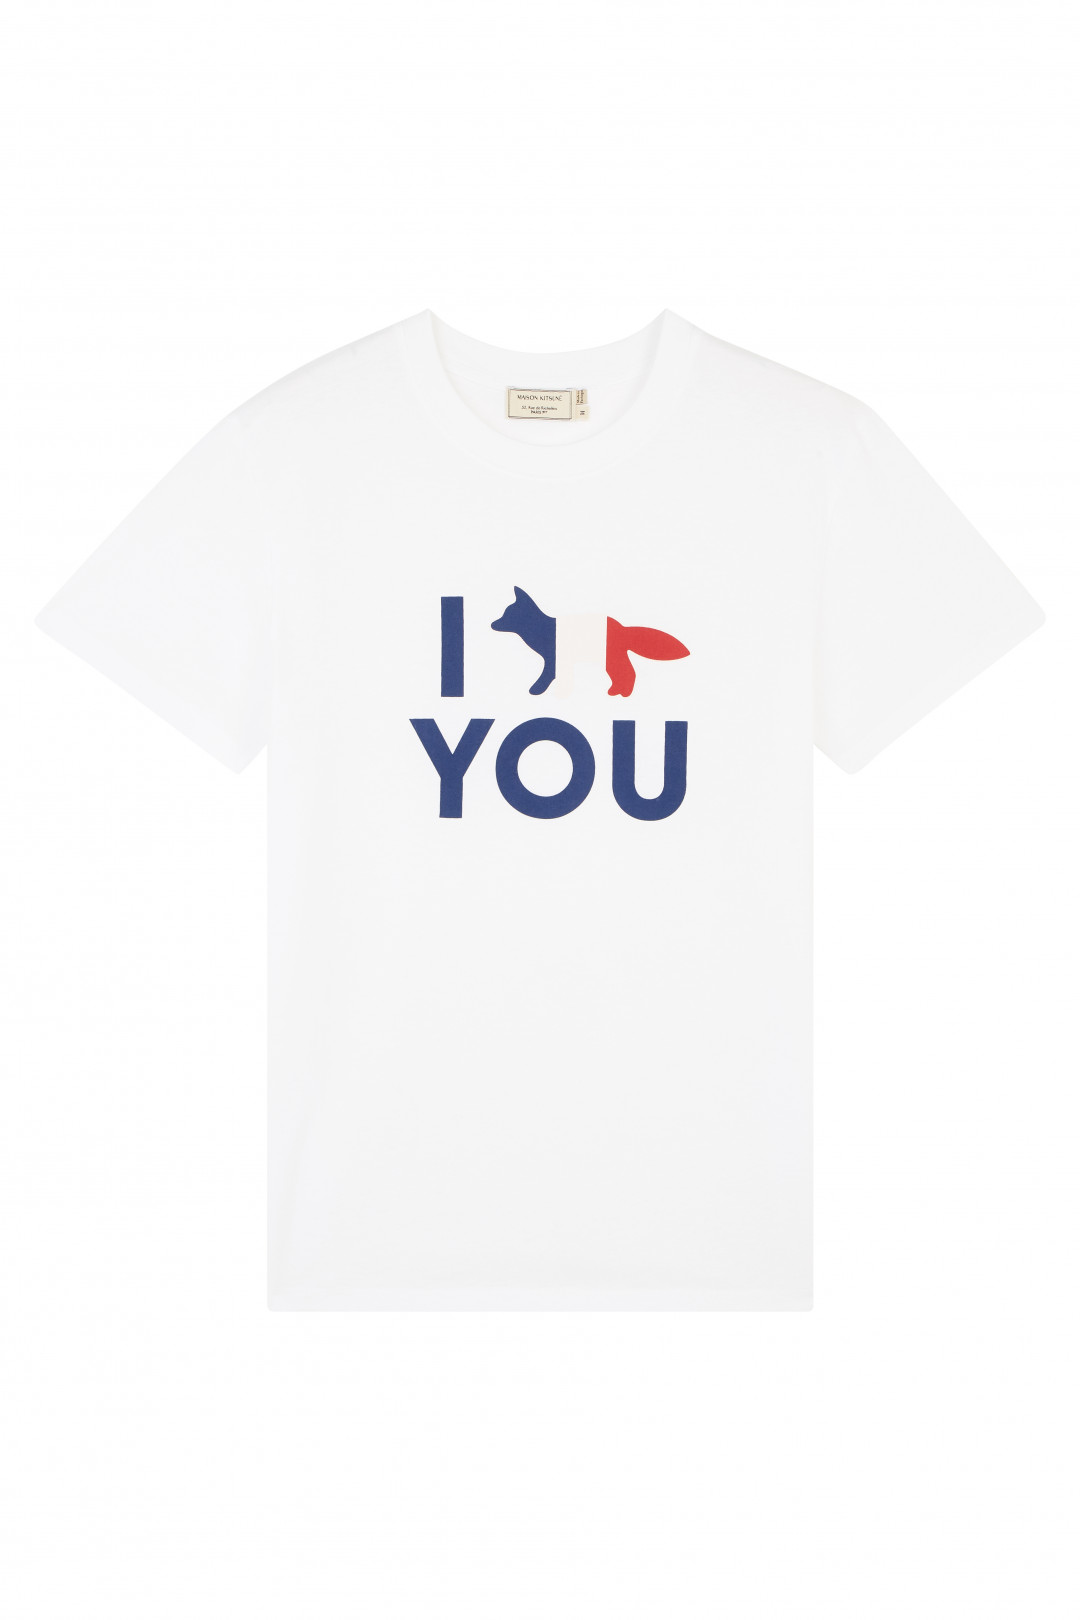 「I FOX YOU: YOUR NEW FAVORITE ANIMAL」Tシャツ（1万4,000円）